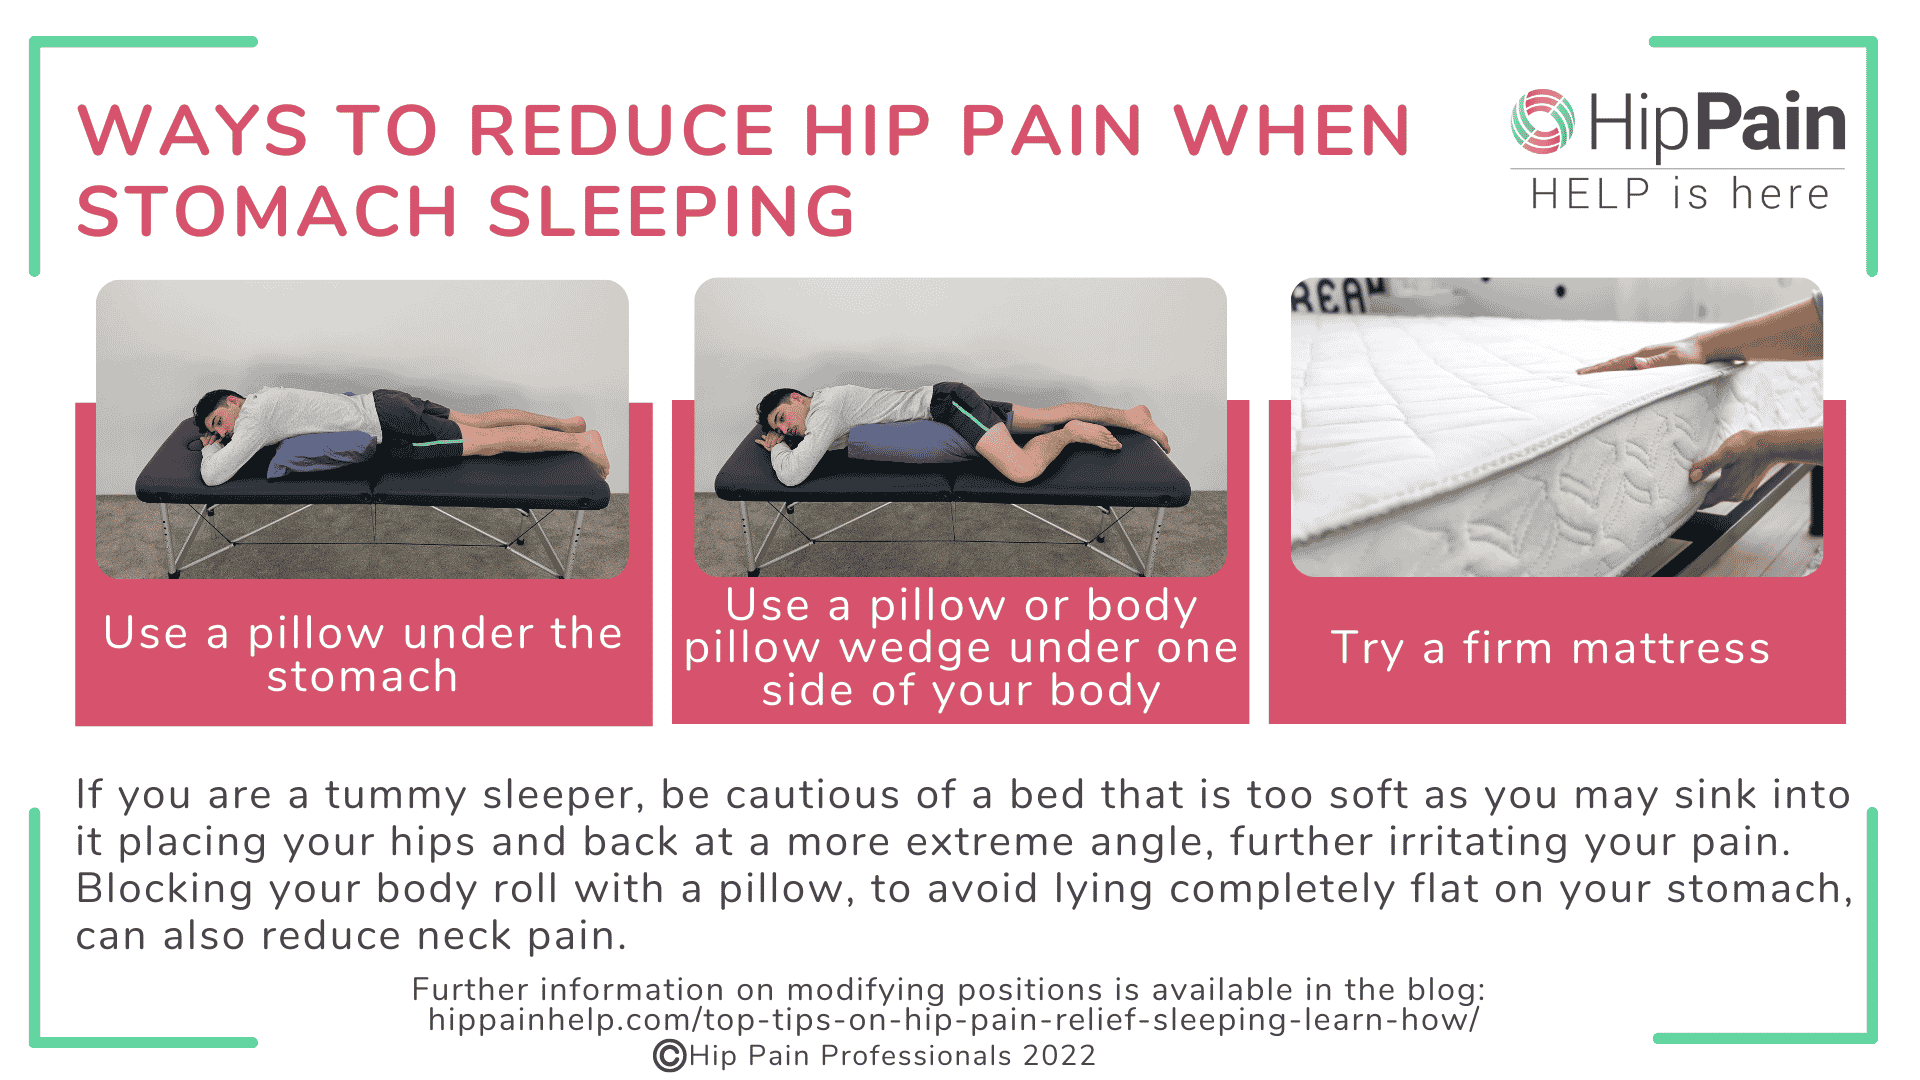 Hip Pain Help - Many people ask about how to side sleep with less